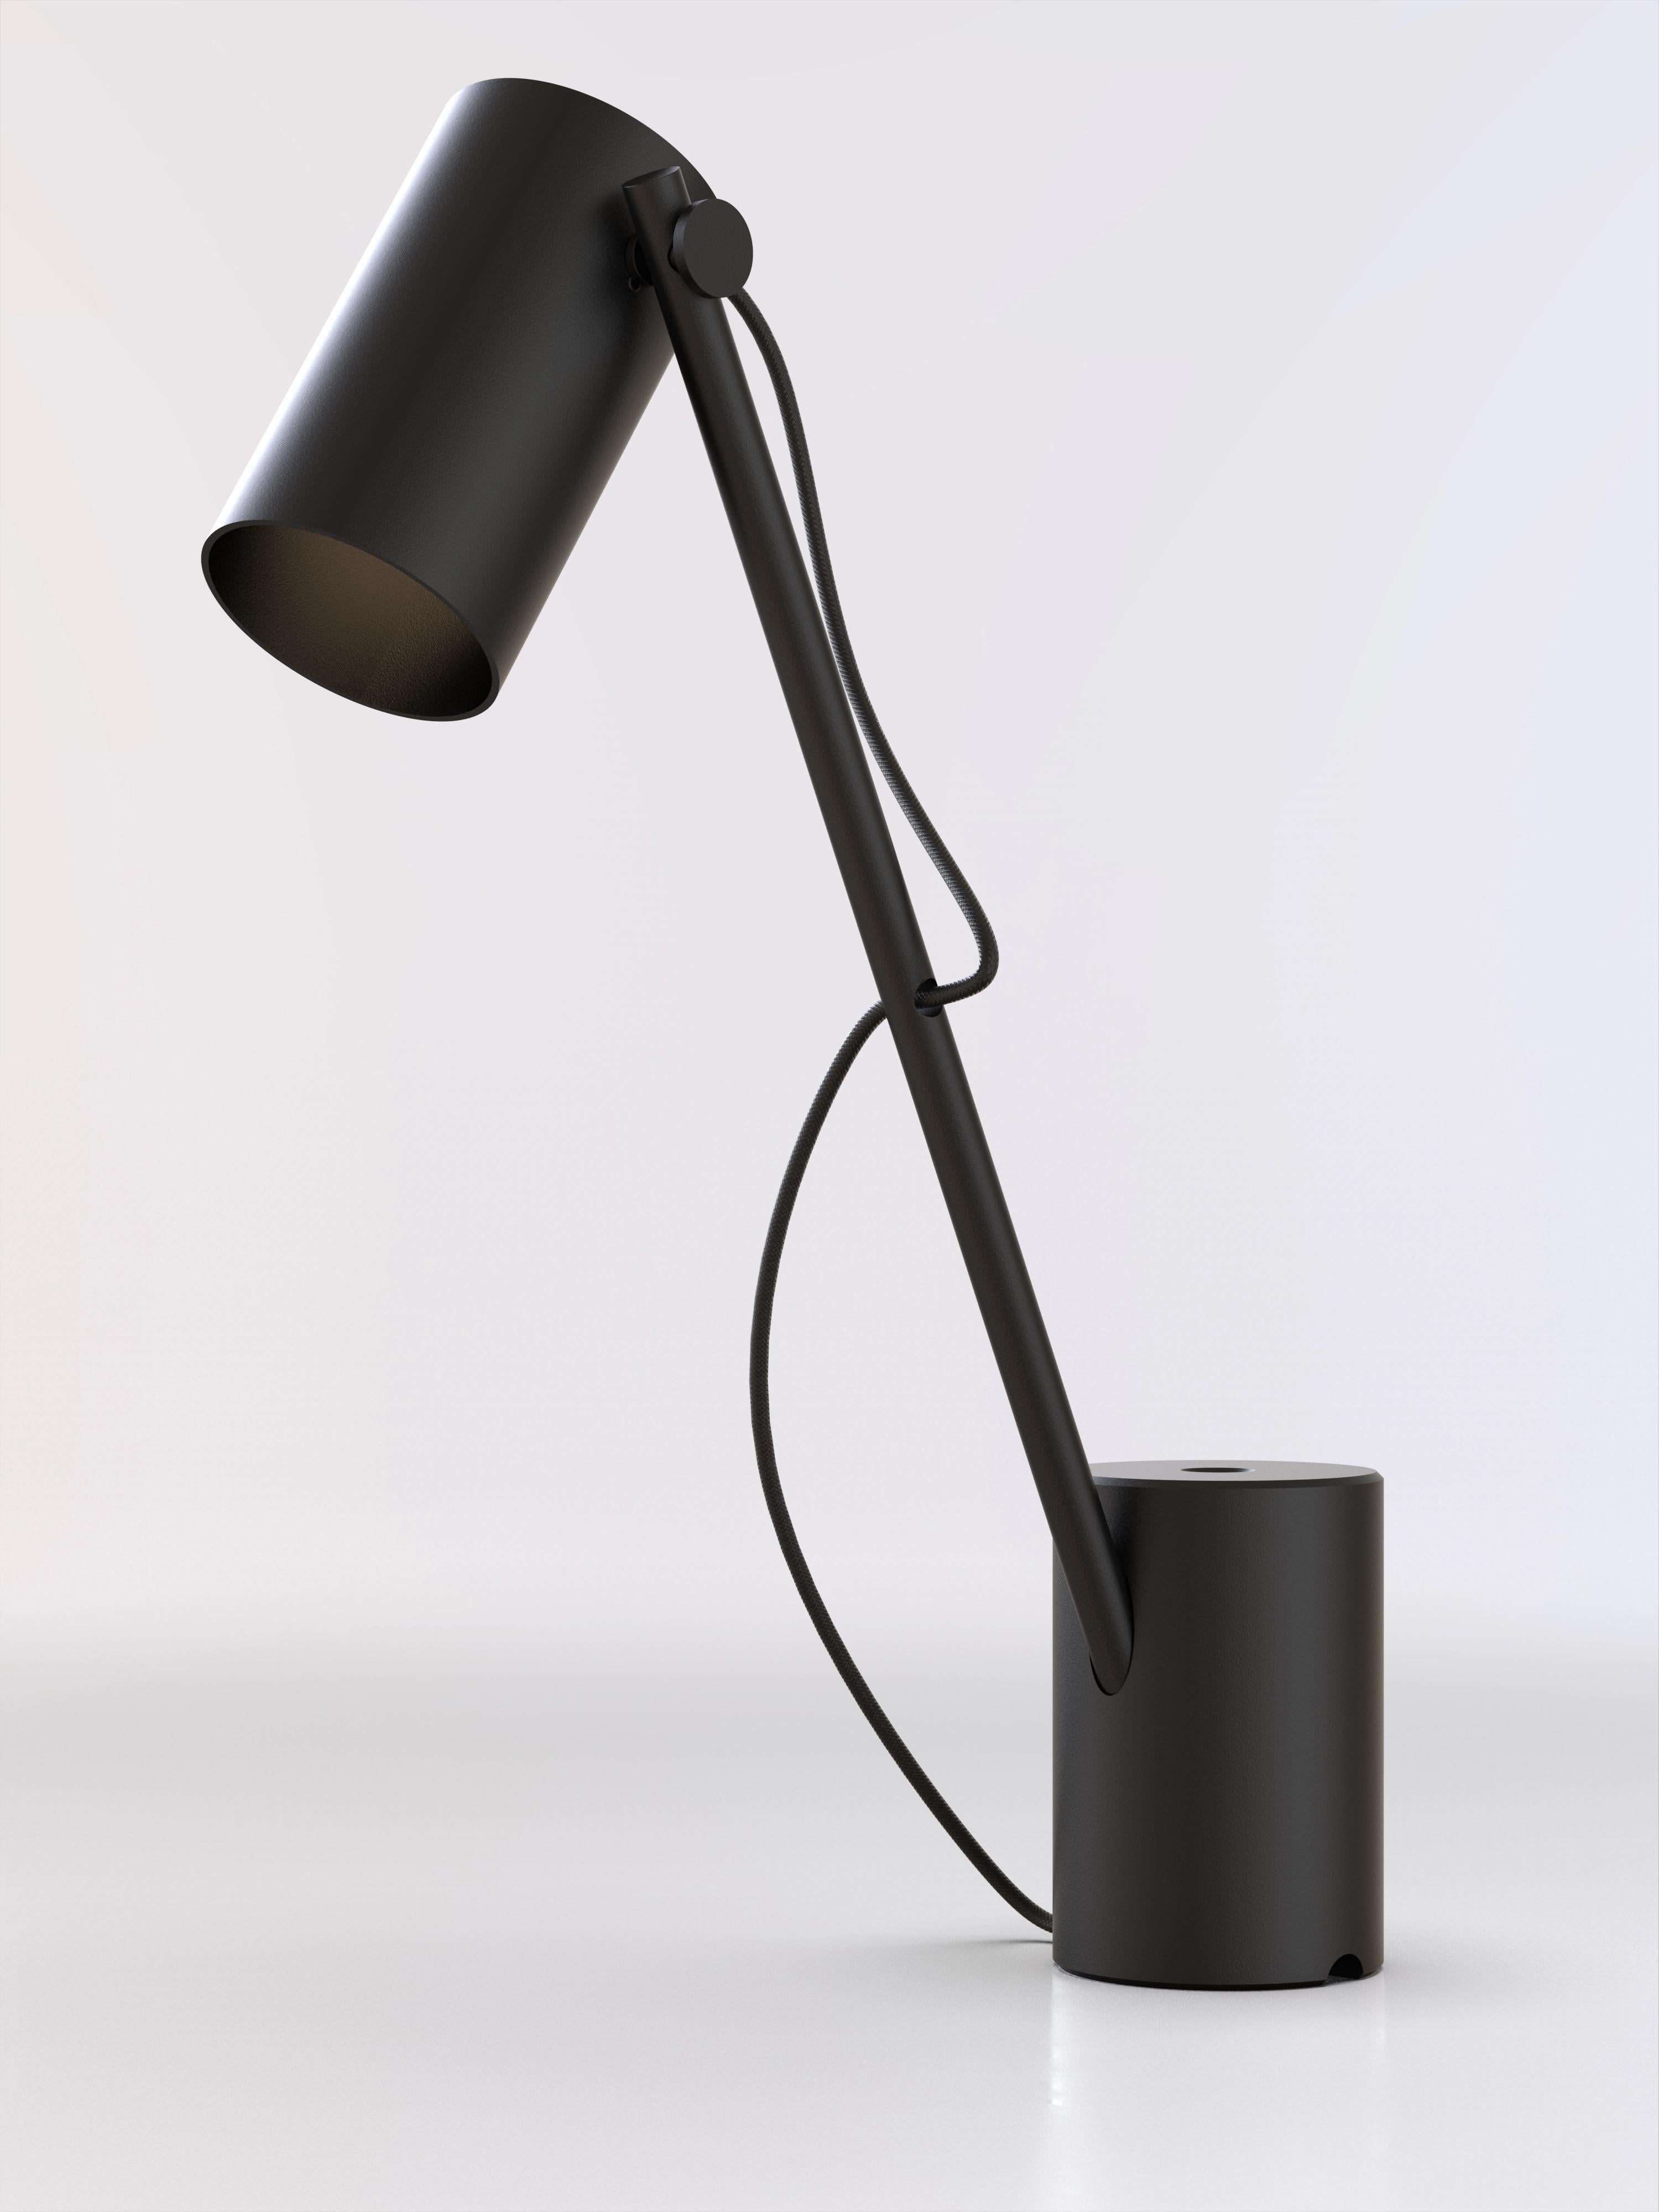 Reconfigurable table lamp with black paint structure and black paint base.
Thanks to the two holes on the base, the lamp can be used as a table lamp or as an ambient light.